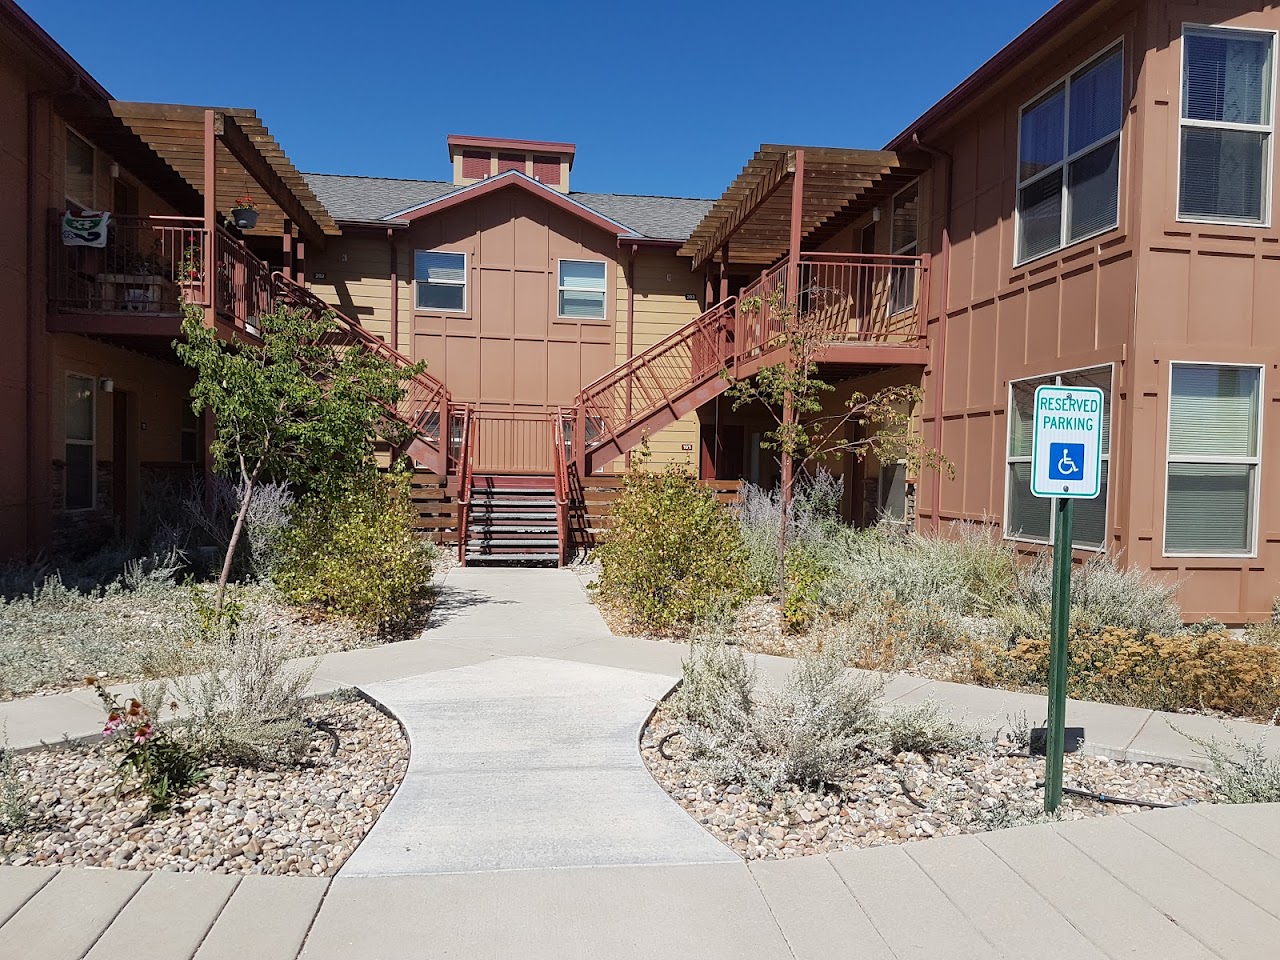 Photo of BRUBAKER PLACE. Affordable housing located at 2001 E EMPIRE ST CORTEZ, CO 